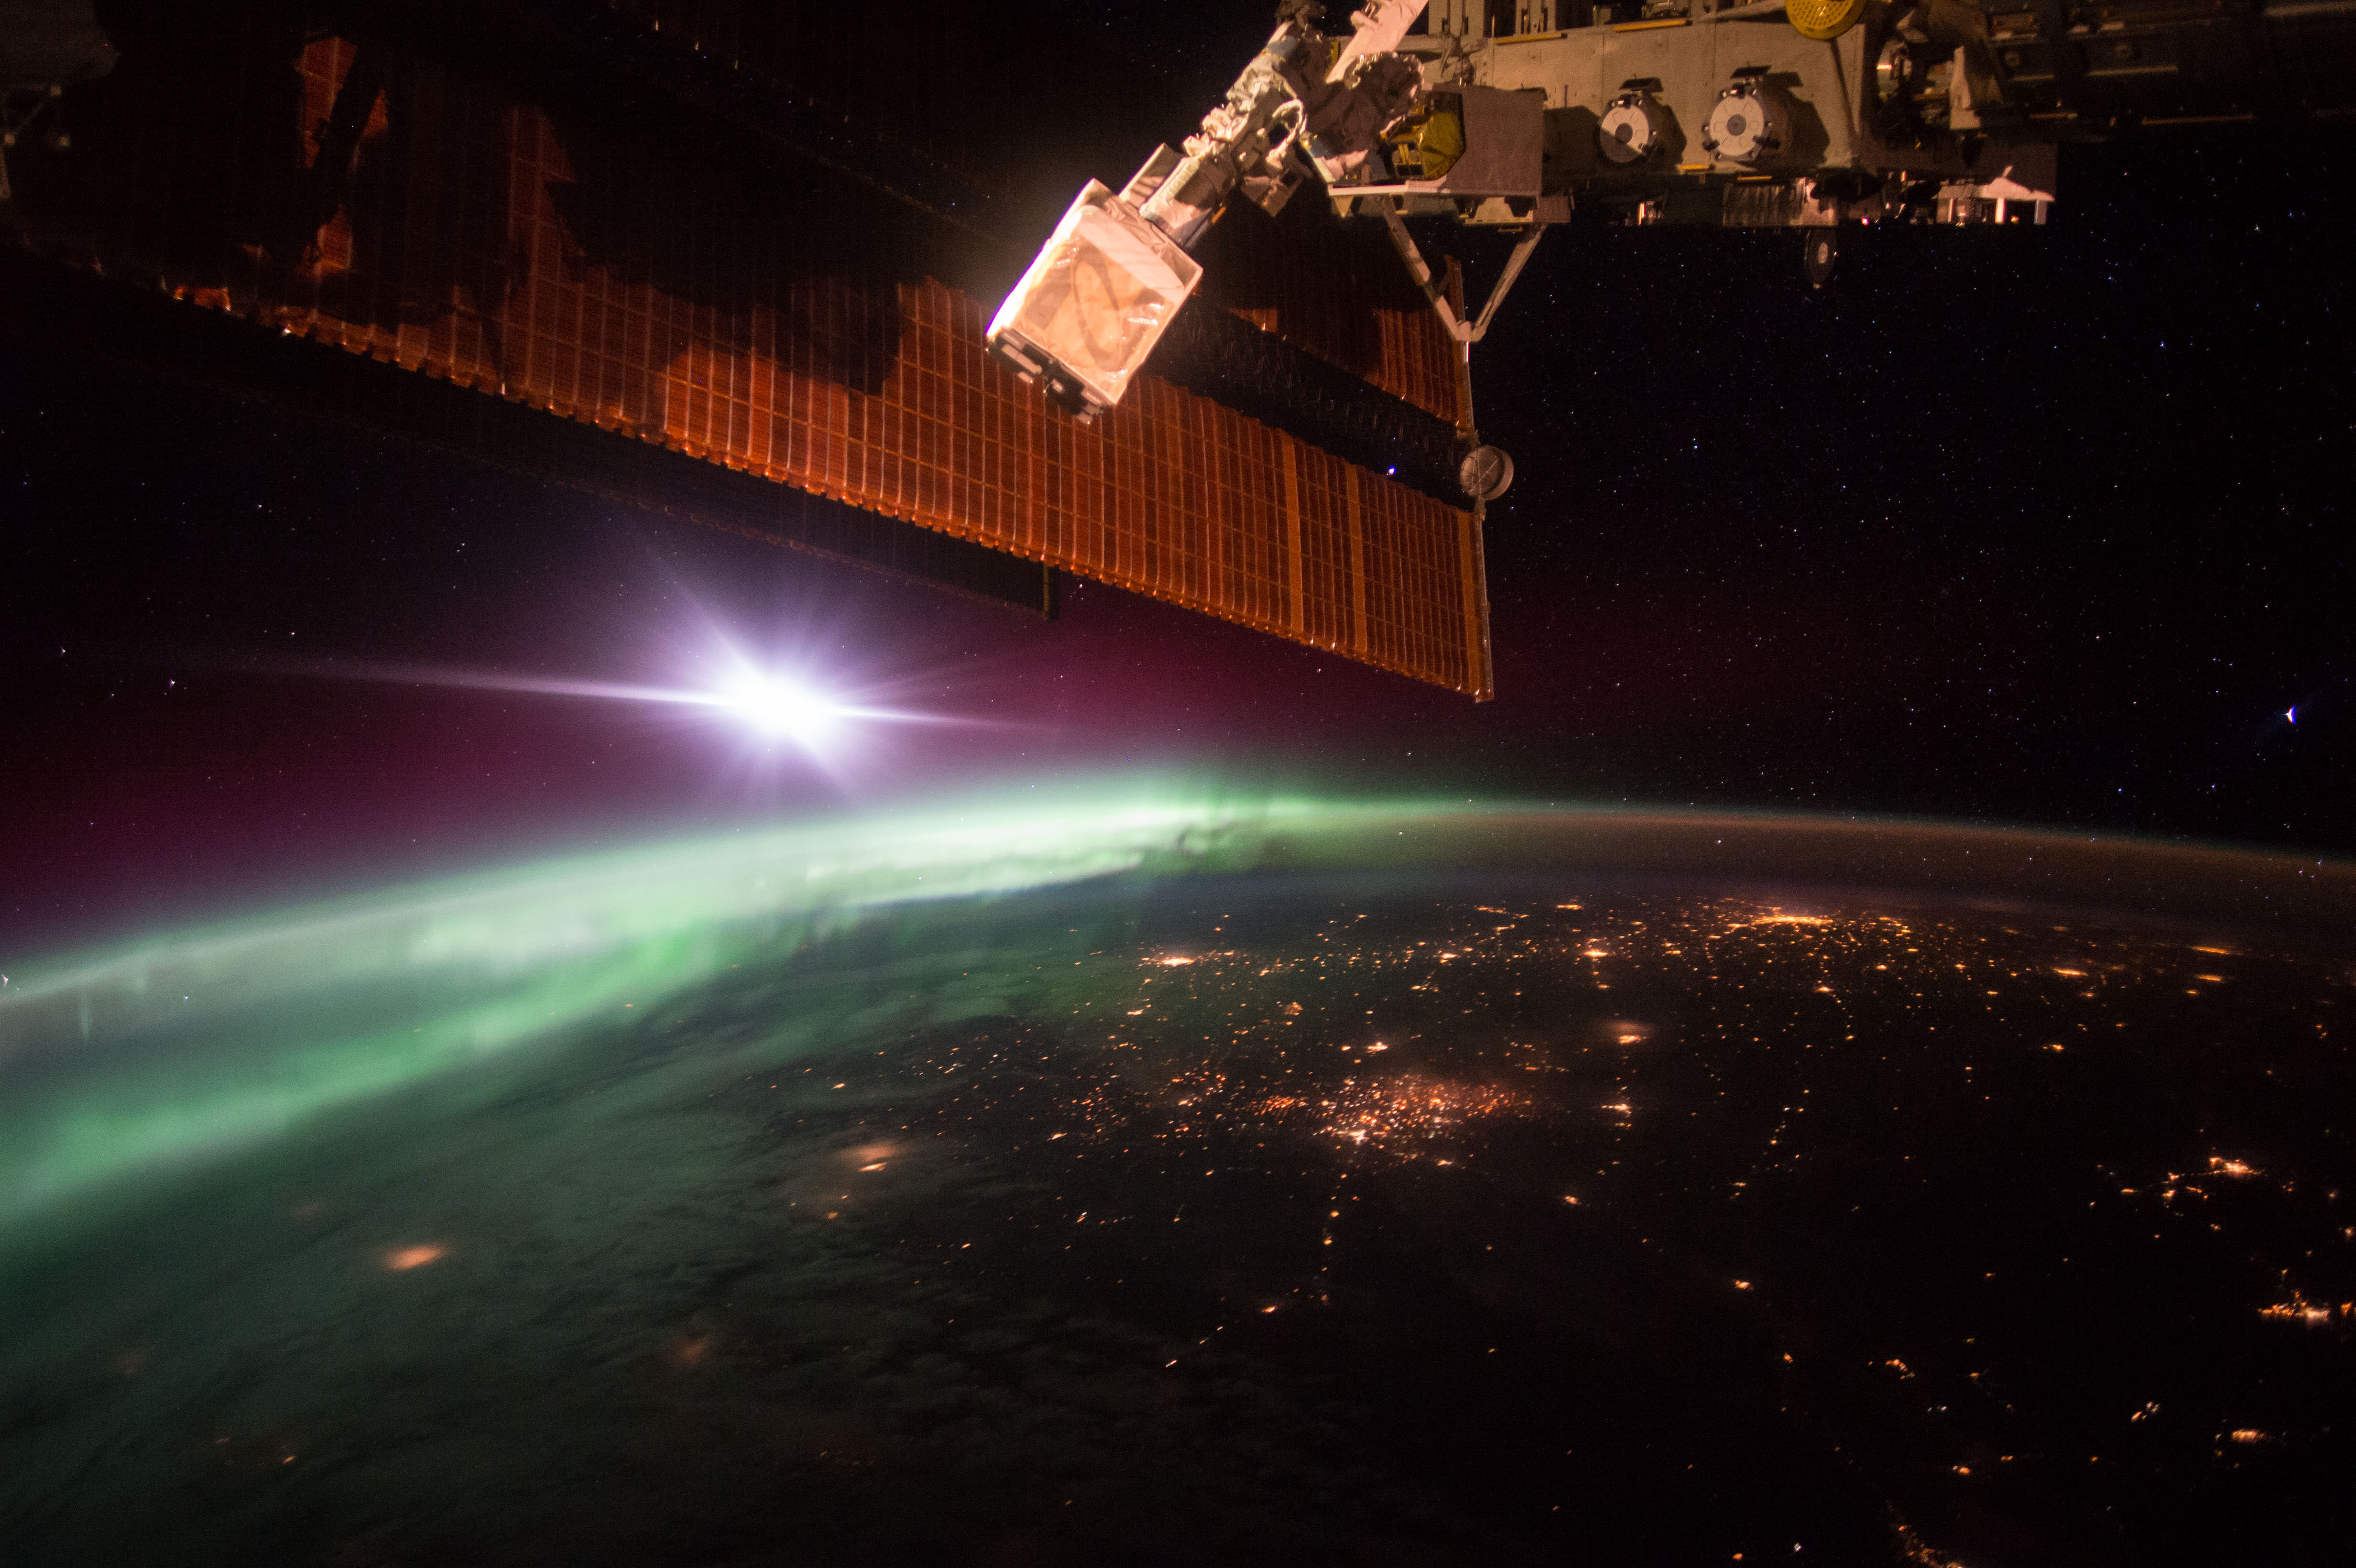 Morning Aurora From the Space Station. NASA astronaut Scott Kelly (@StationCDRKelly) captured this photograph of the green lights of the aurora from the International Space Station on Oct. 7, 2015. Credit: NASA